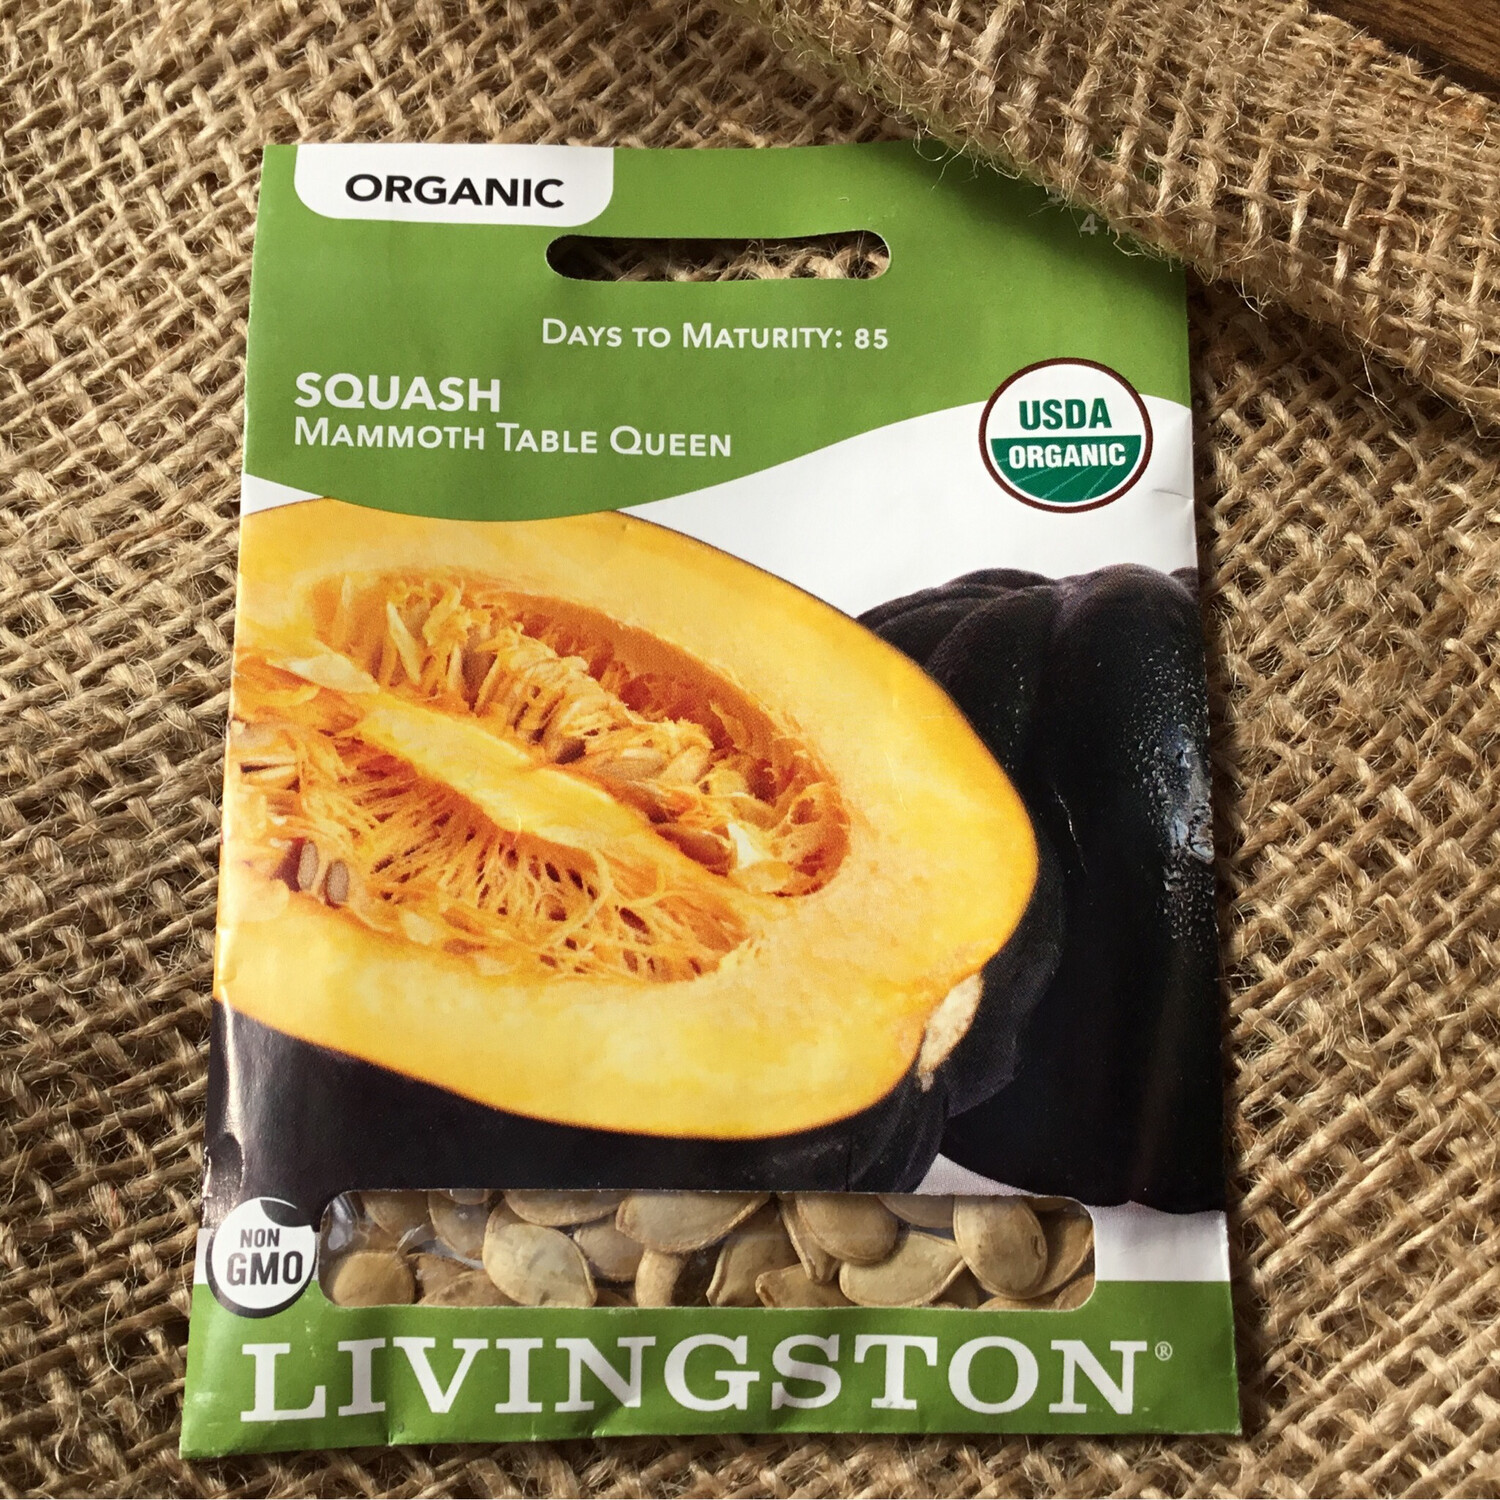 (Seed) Organic Squash Mammoth Table Queen $3.79